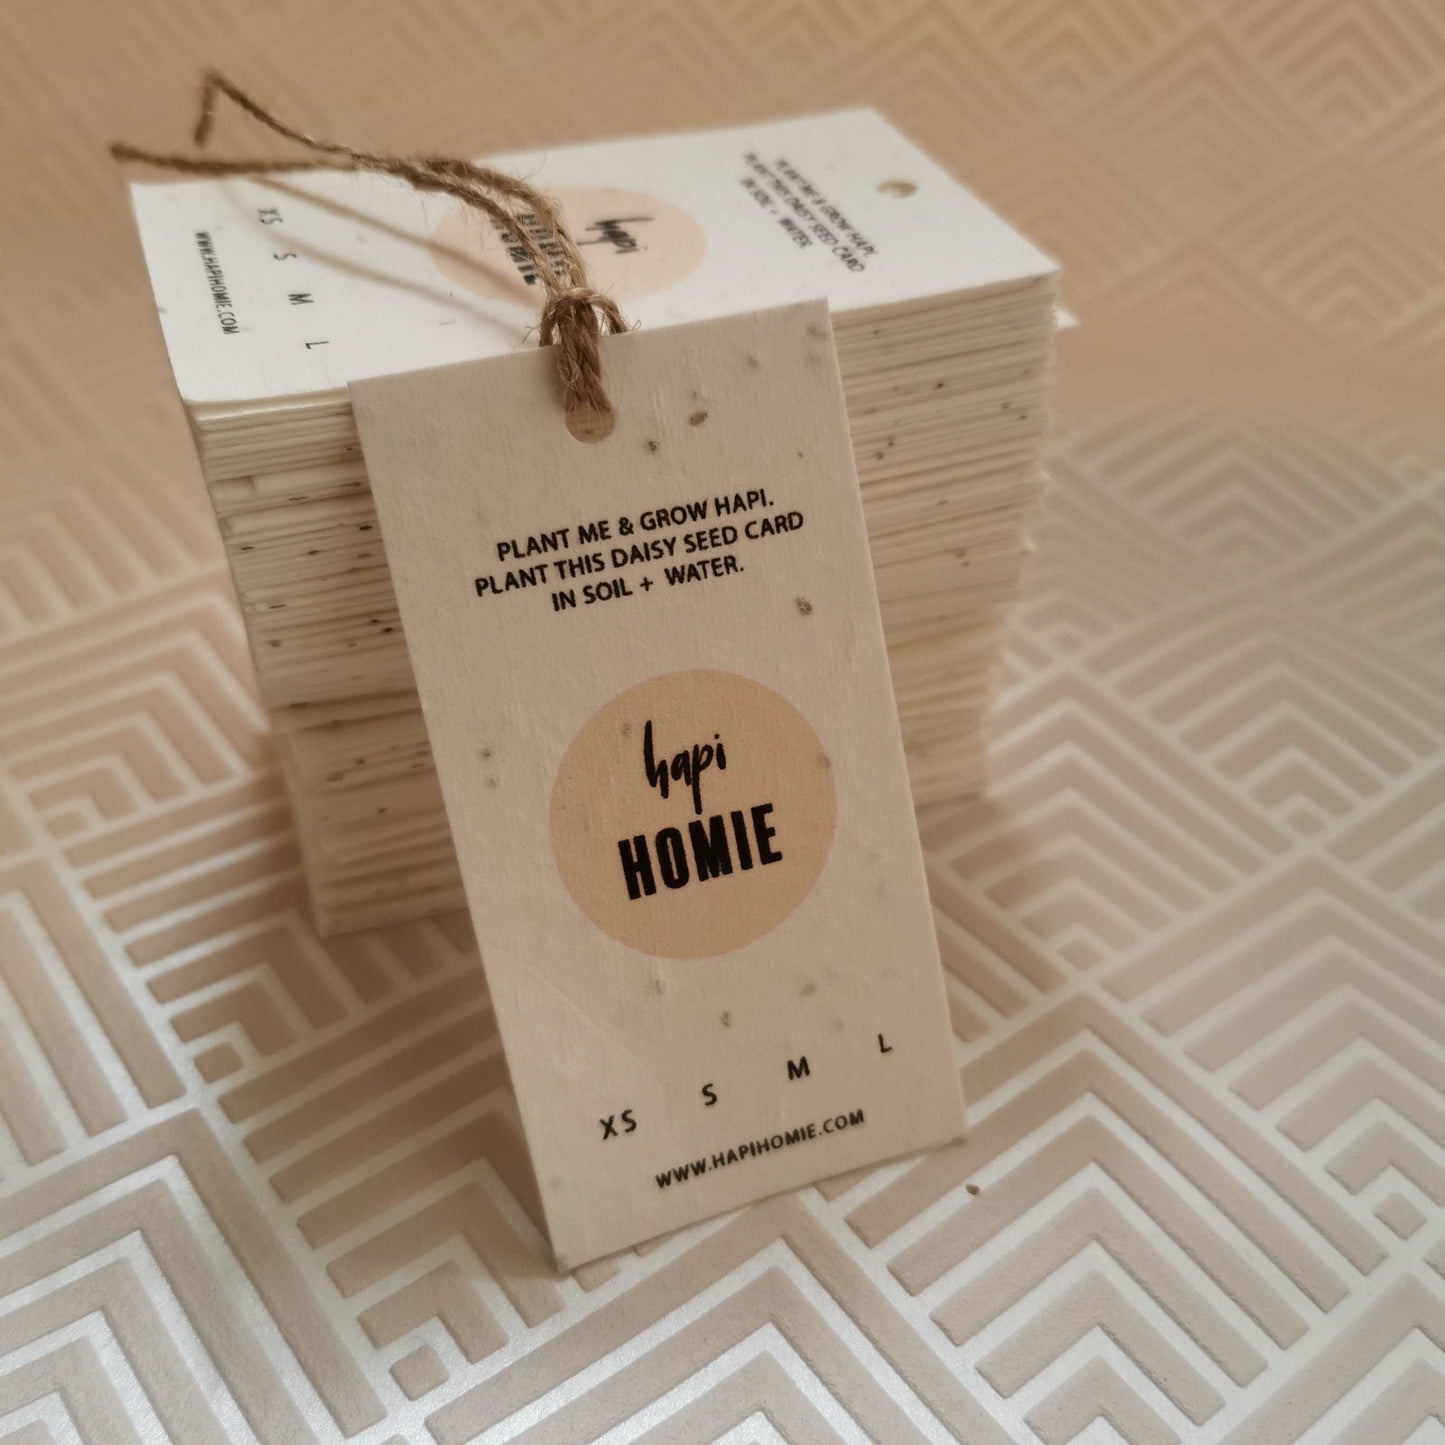 Plantable Seed Paper Seed Paper Tags - Booklet  Little Green Paper Shop